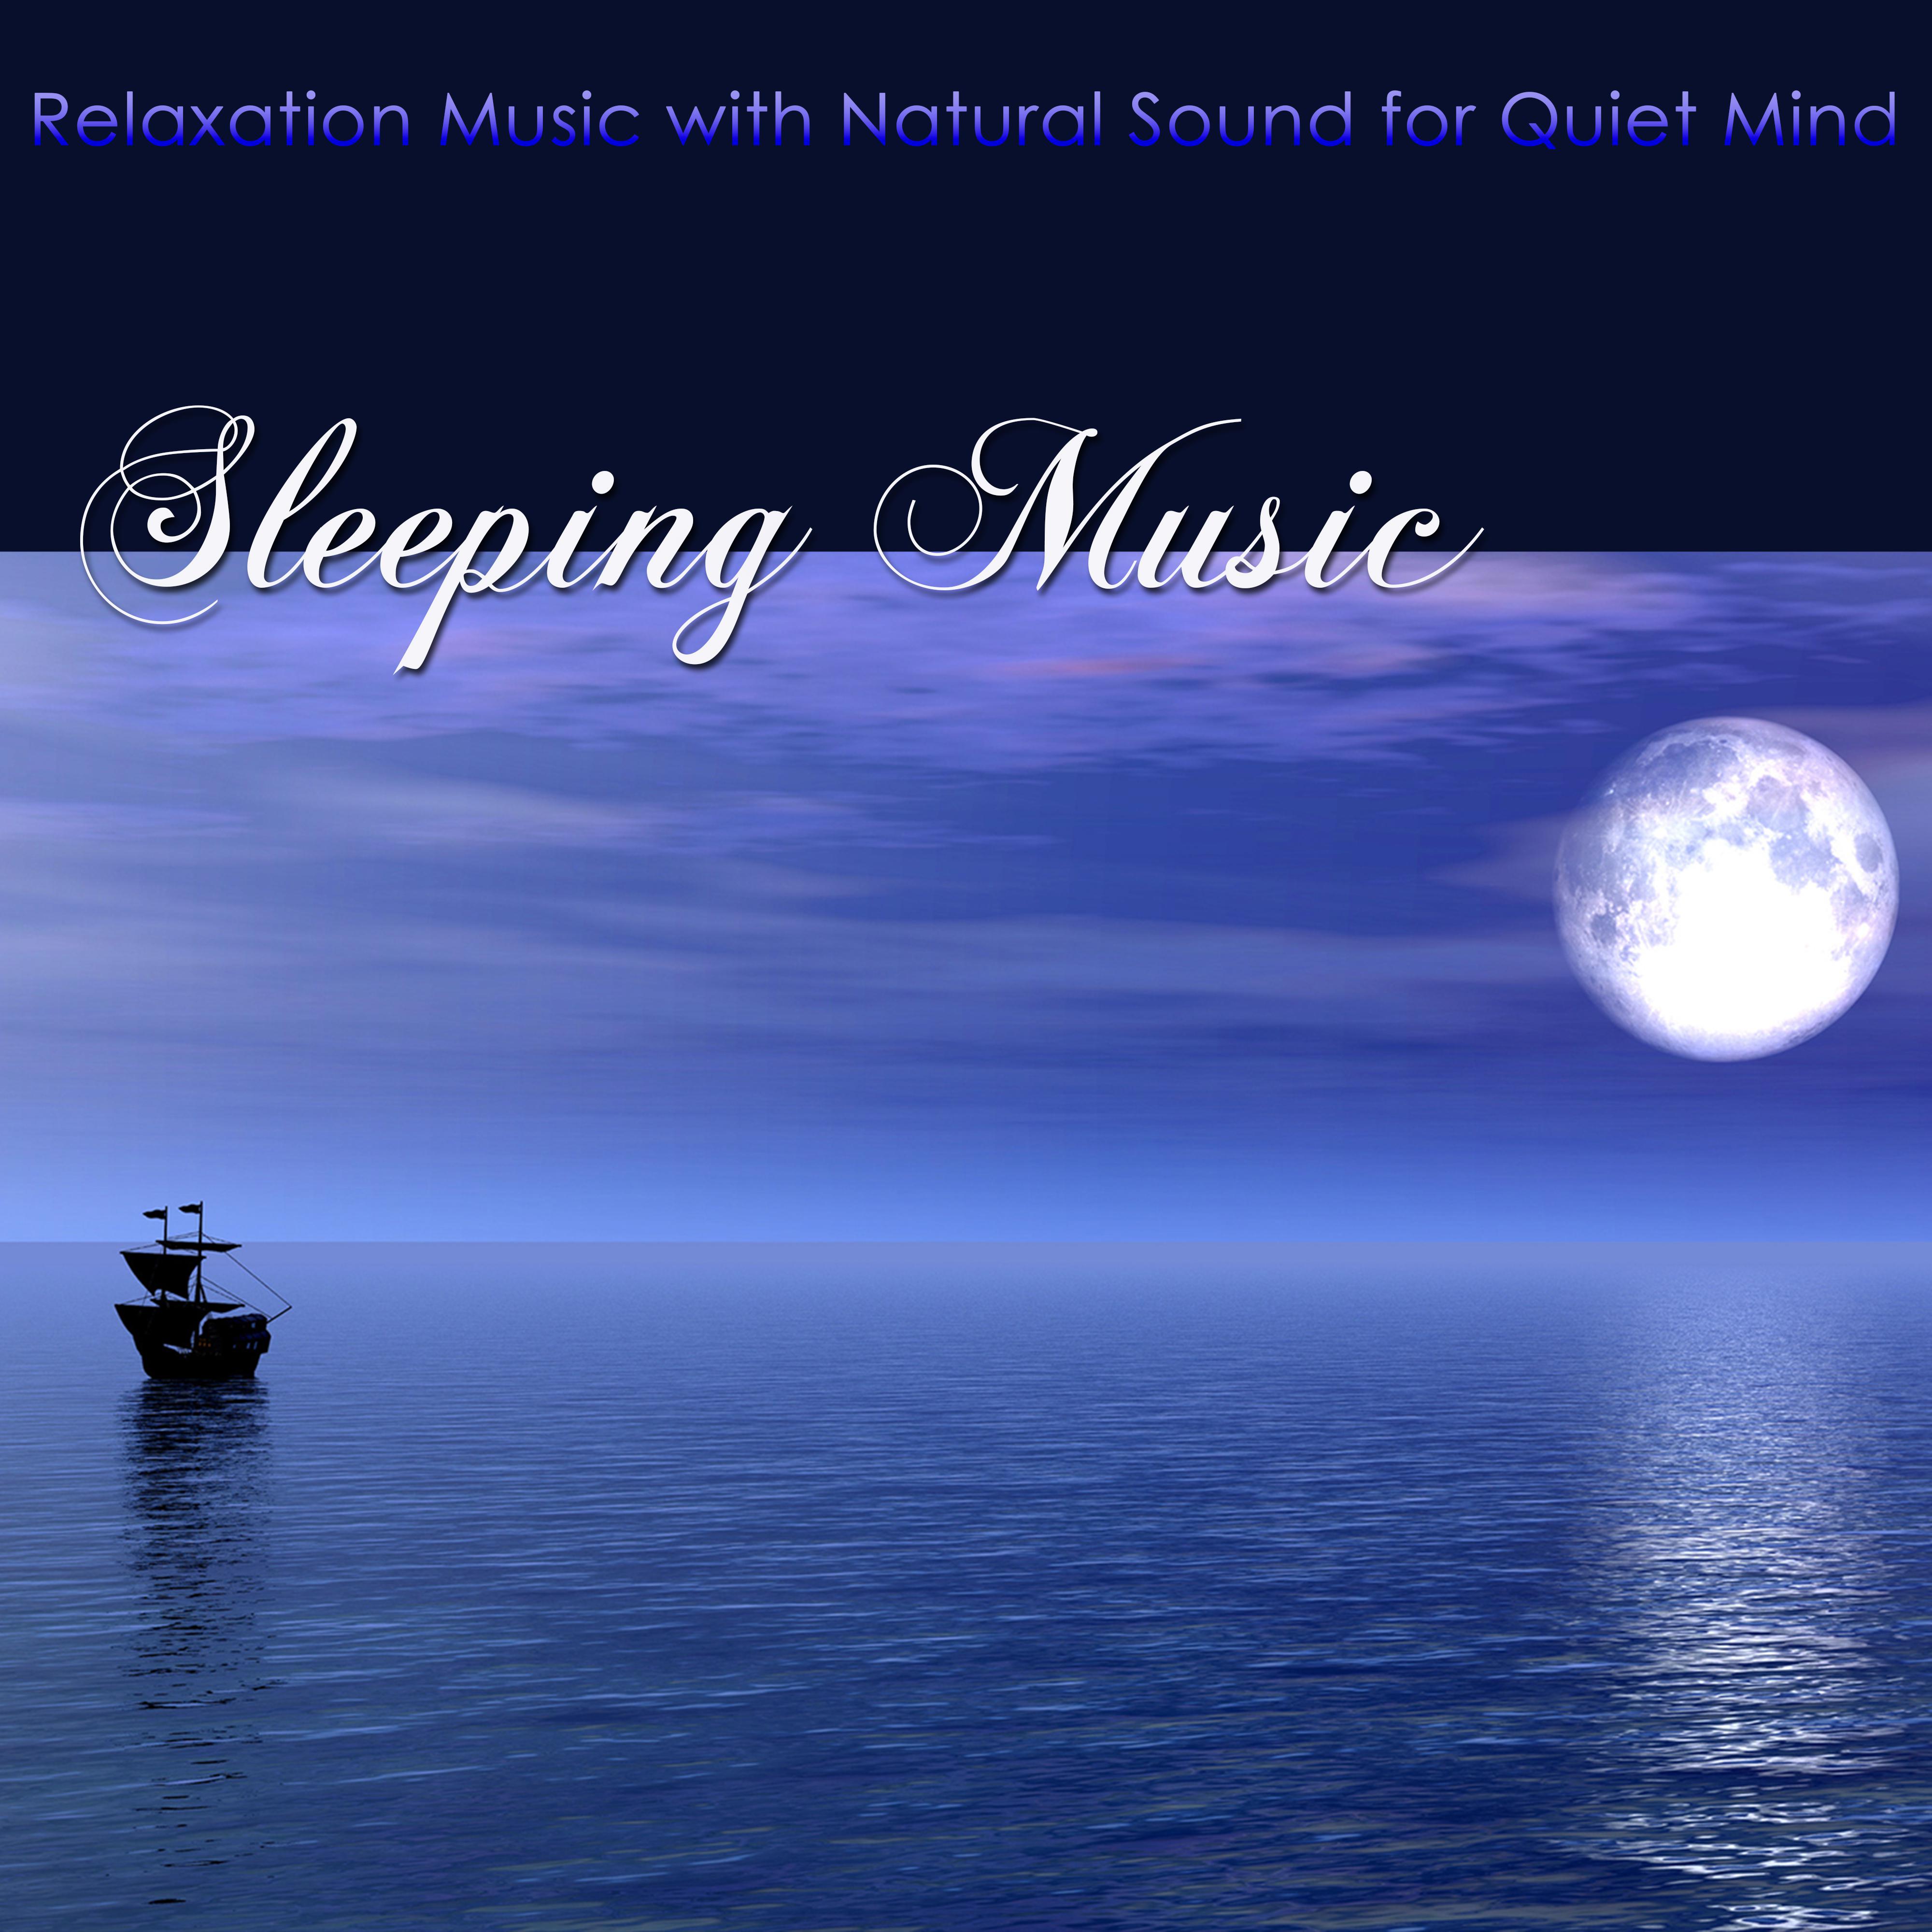 Sleeping Music – Relaxation Music with Natural Sound for Quiet Mind, Deep Relaxation, Peaceful Sleep & Help Sleeping if you suffer from Sleeping Disorders and Insomnia